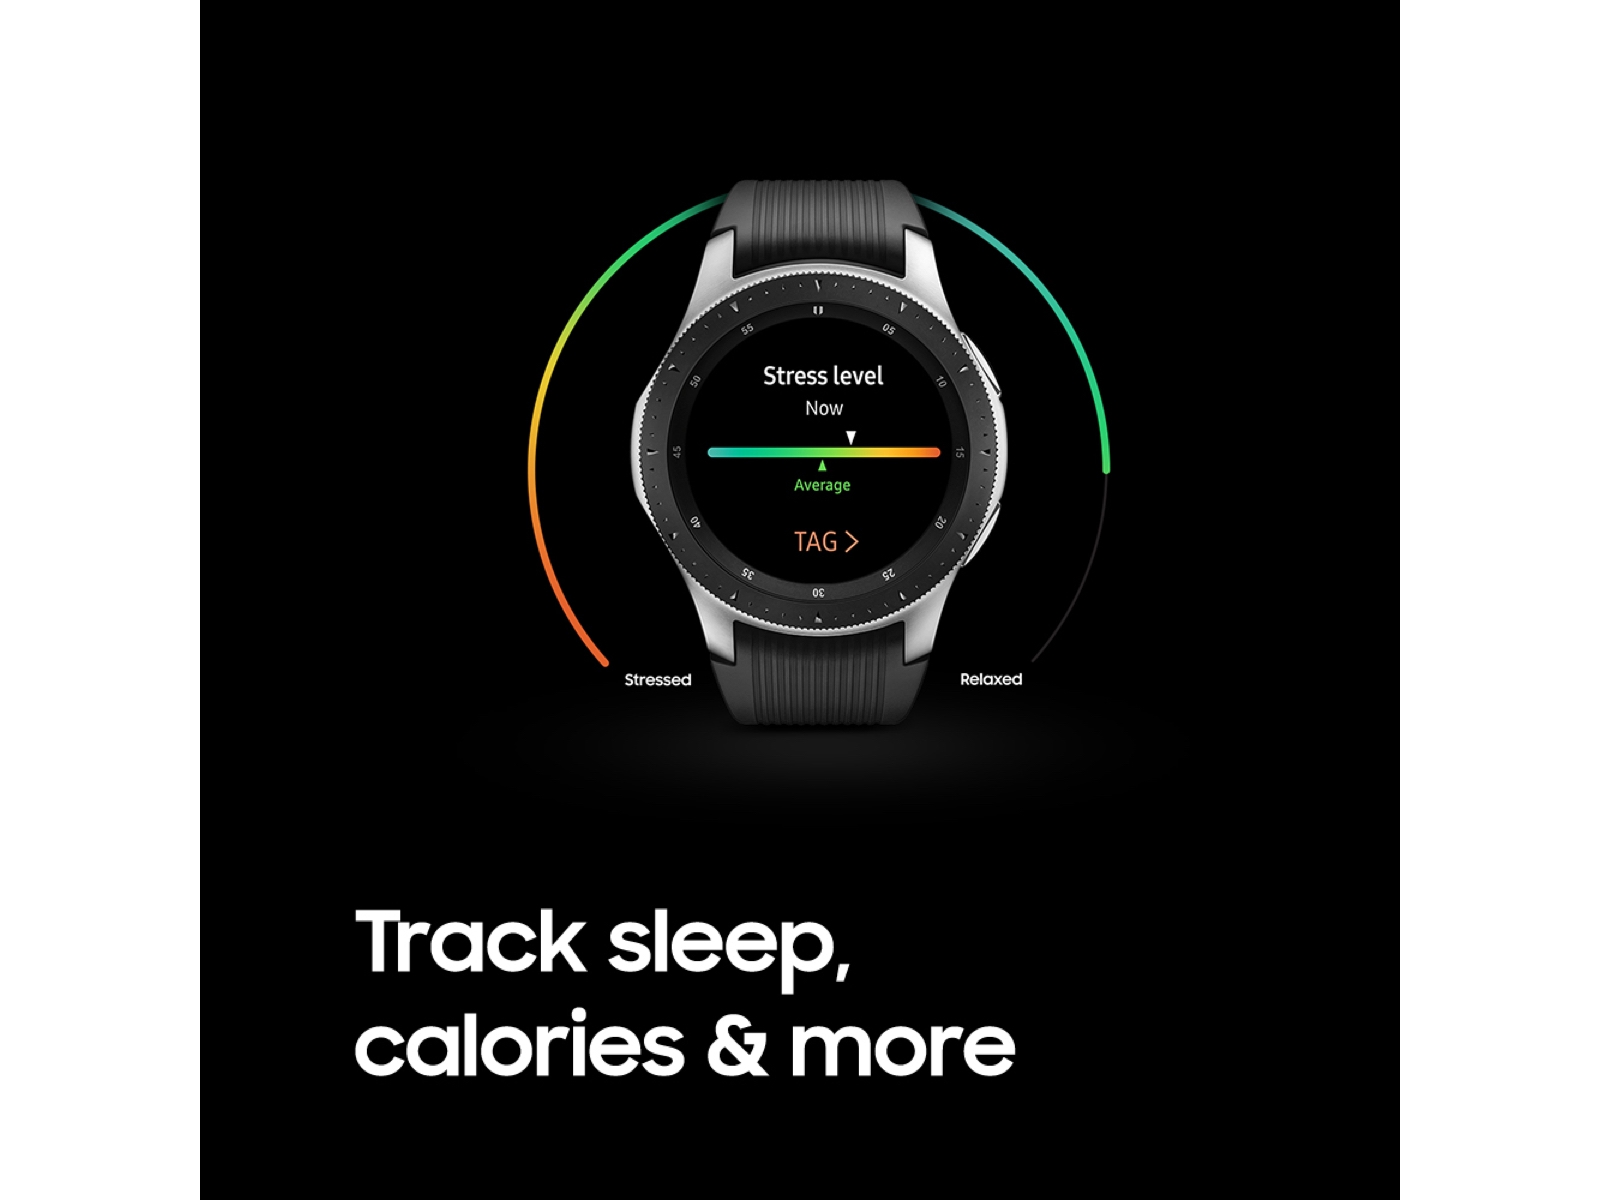 Thumbnail image of Galaxy Watch (46mm) Silver (4G LTE)